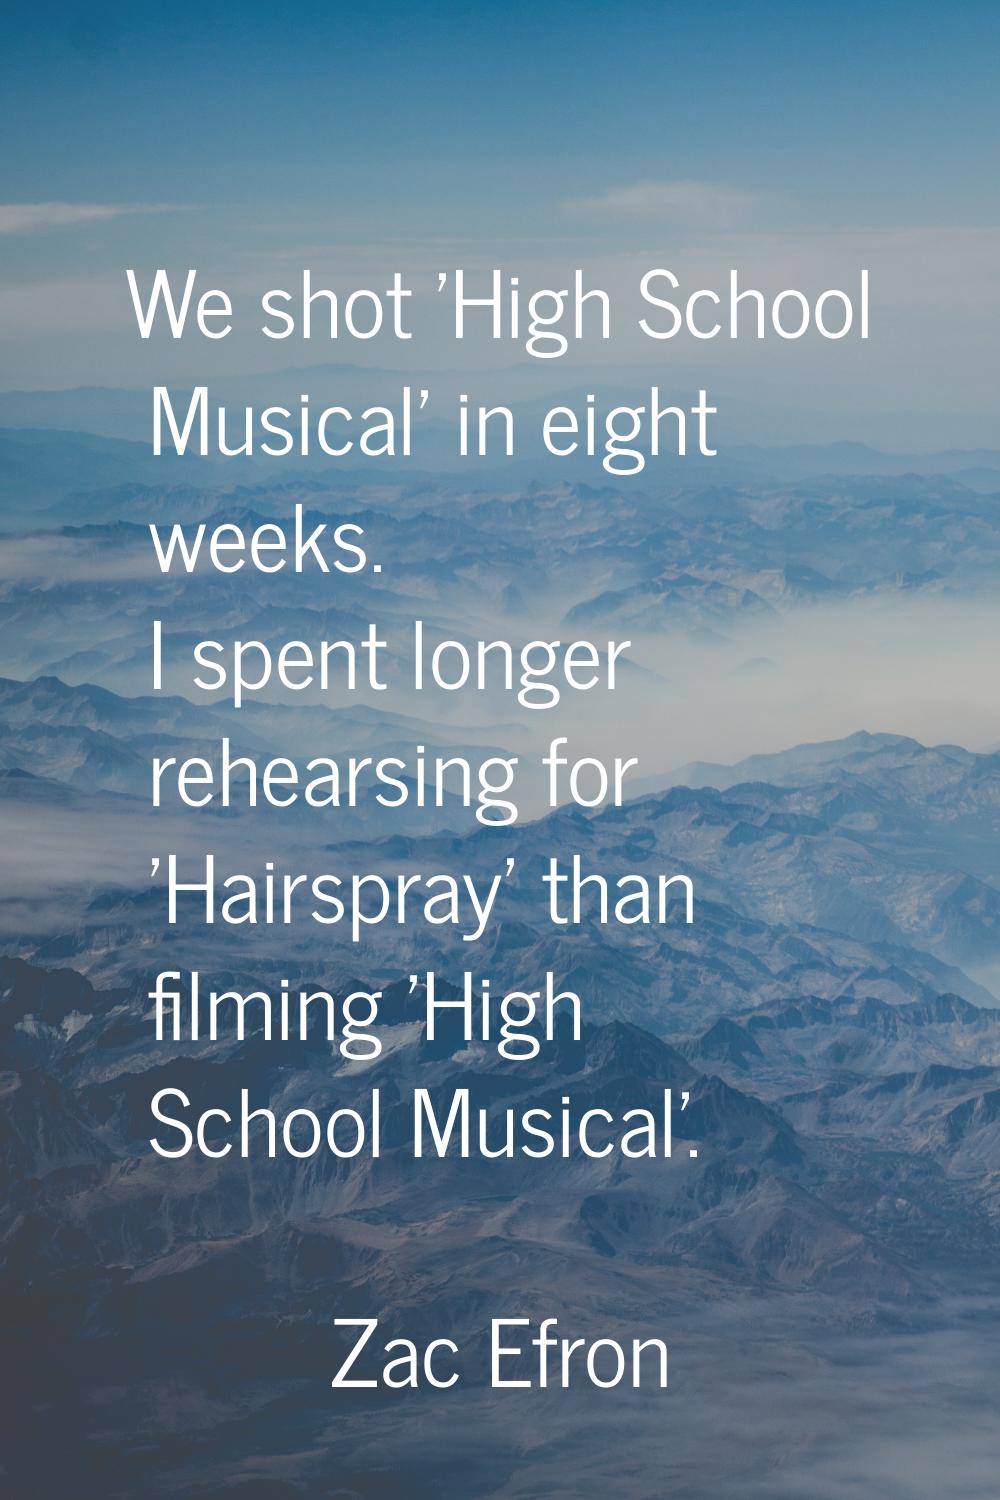 We shot 'High School Musical' in eight weeks. I spent longer rehearsing for 'Hairspray' than filmin